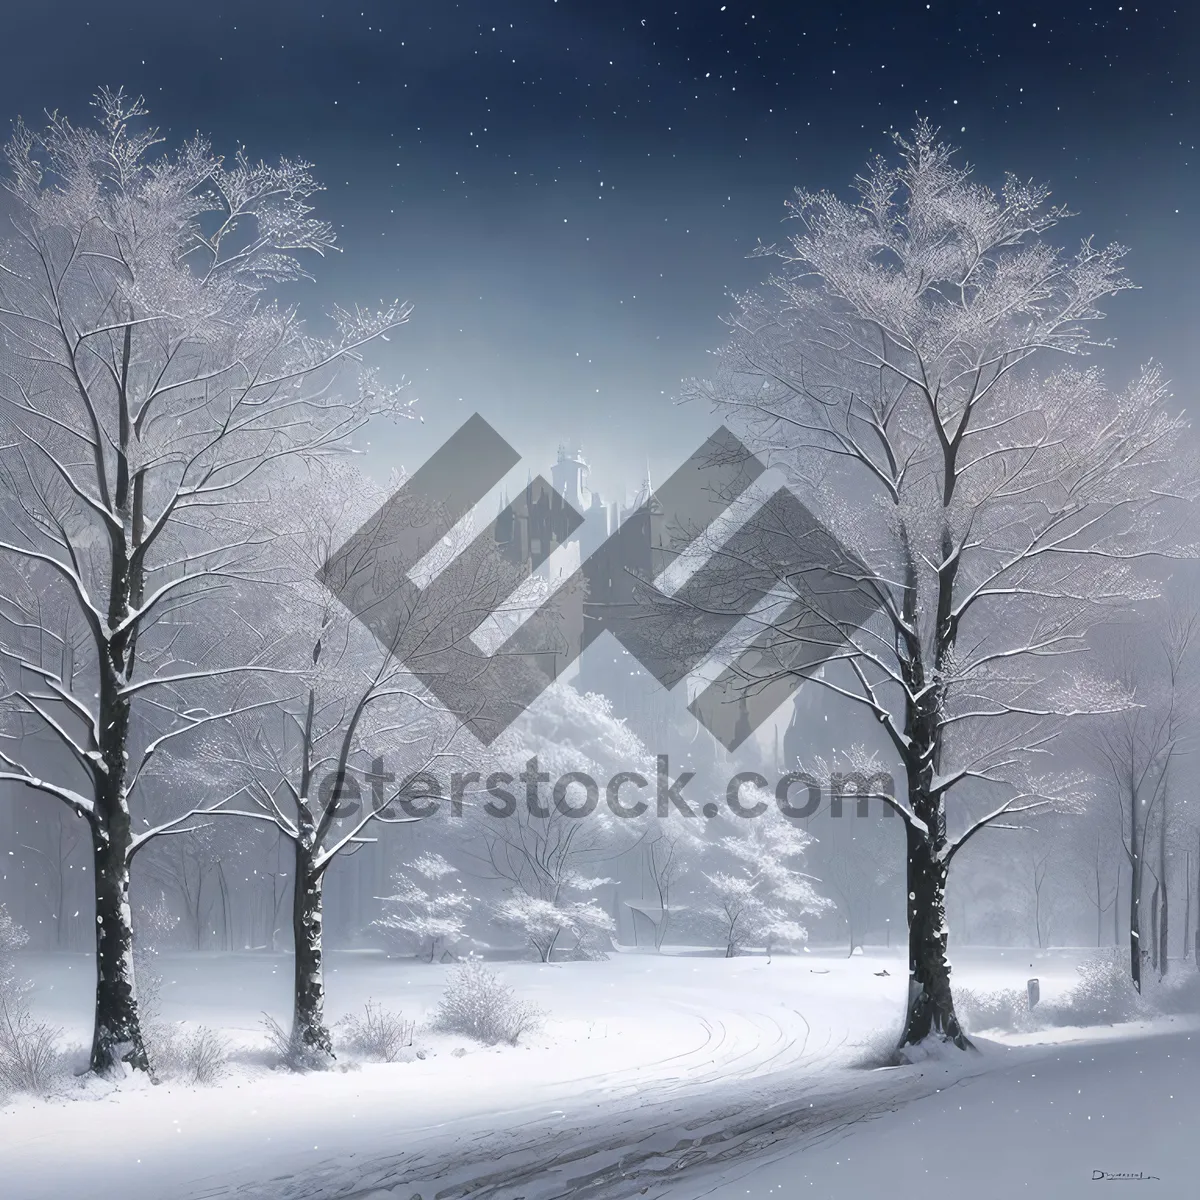 Picture of Winter Wonderland Scene: Frozen Landscape with Snow-Covered Trees